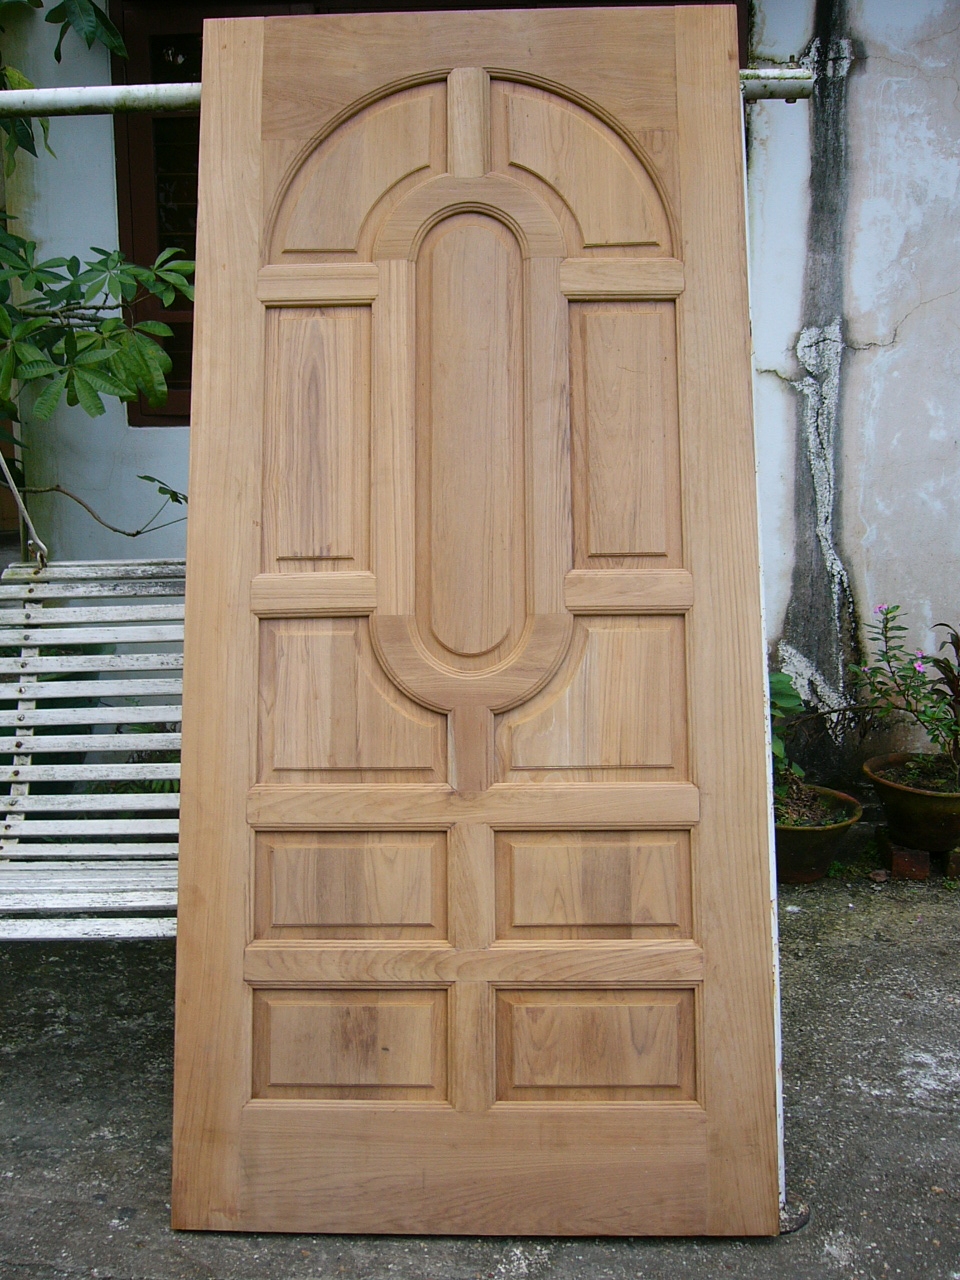 Wood (finished doors, pallets) , food agriculture,